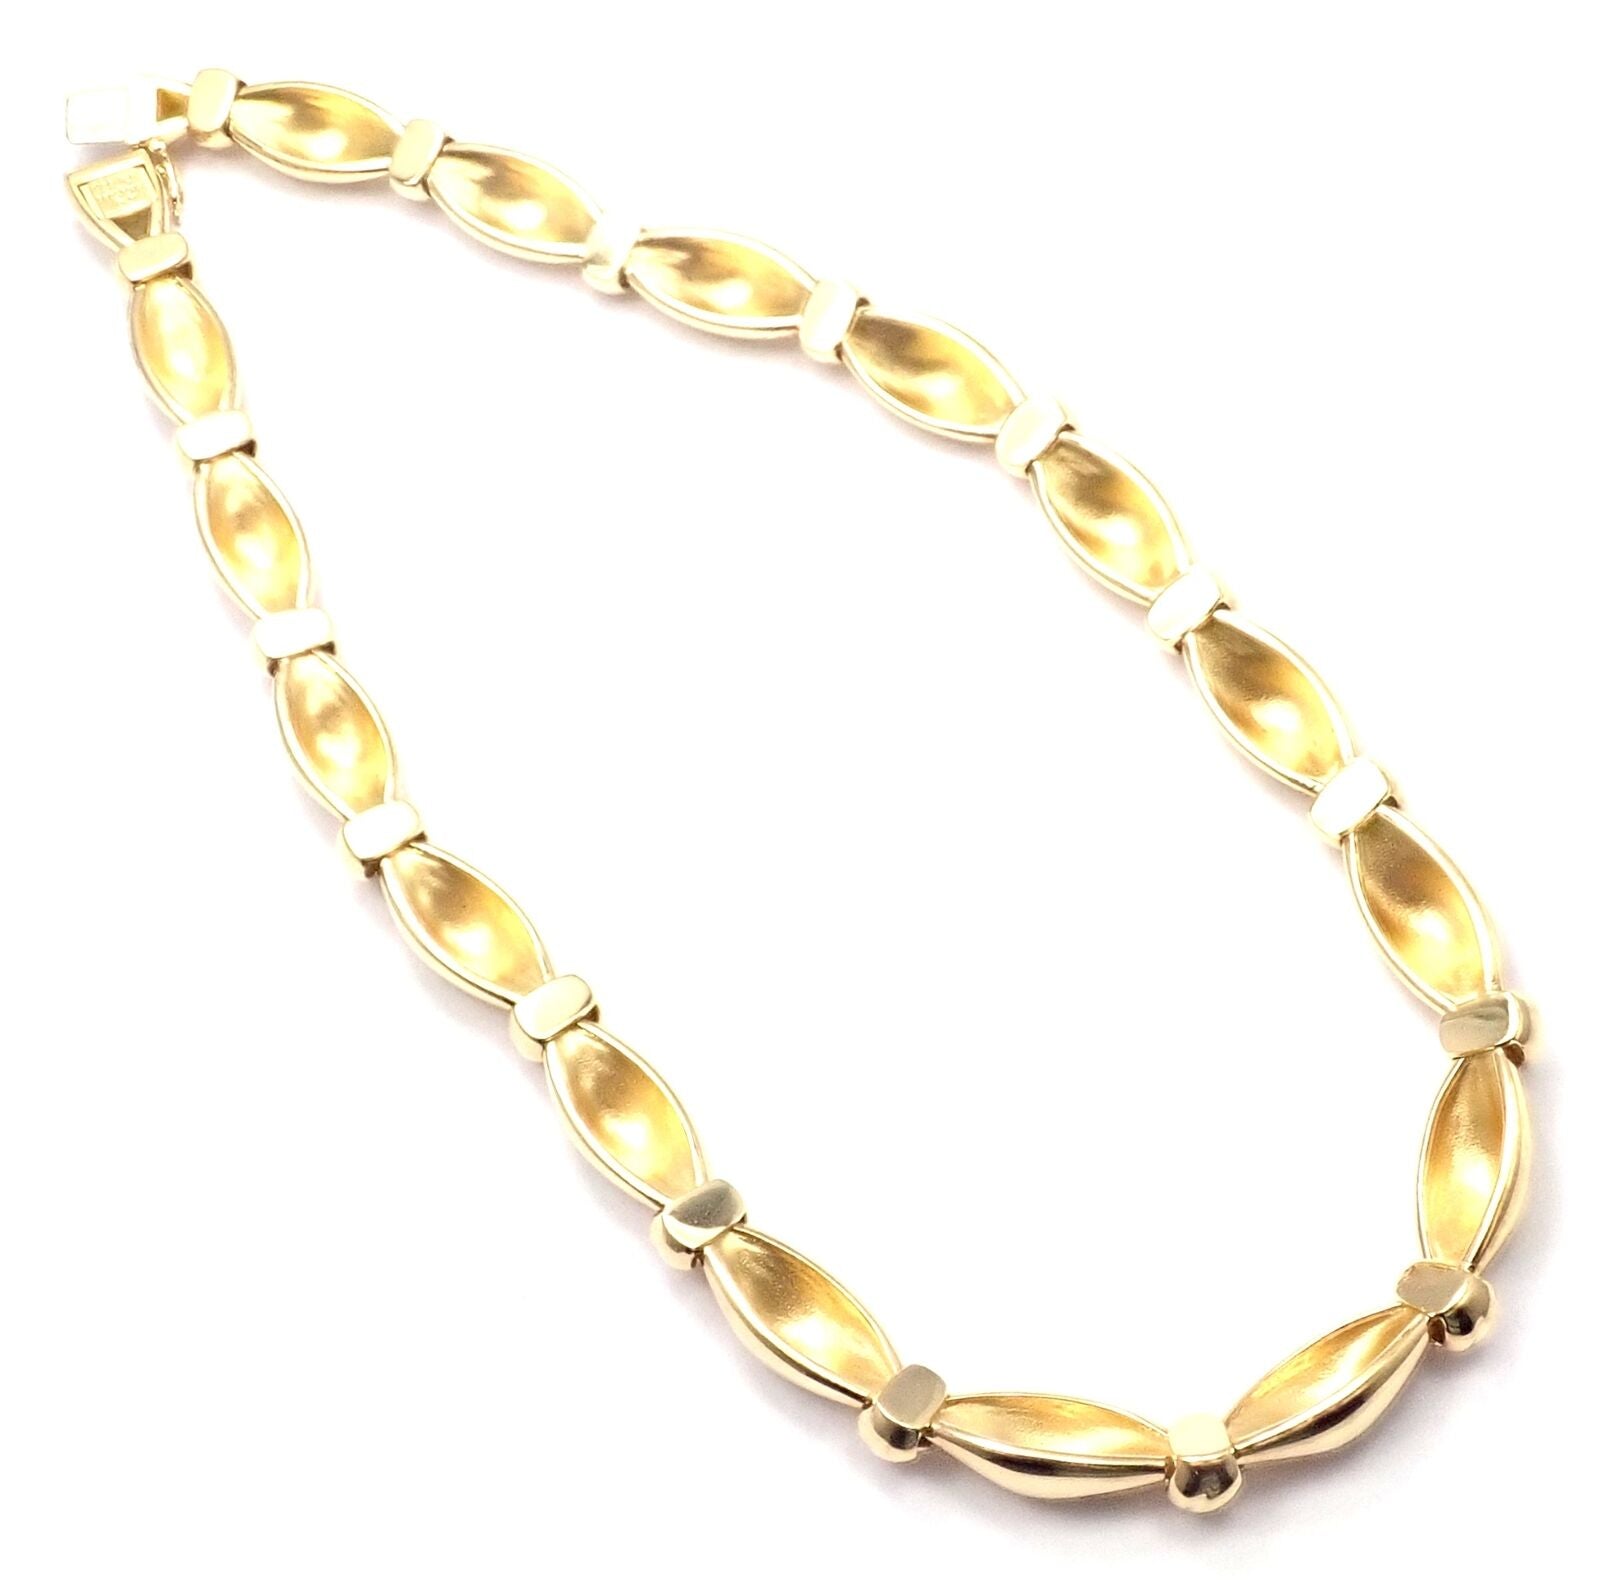 Van Cleef & Arpels Jewelry & Watches:Fine Jewelry:Necklaces & Pendants Rare! Authentic Van Cleef & Arpels 18k Yellow Gold Knotted Link Necklace